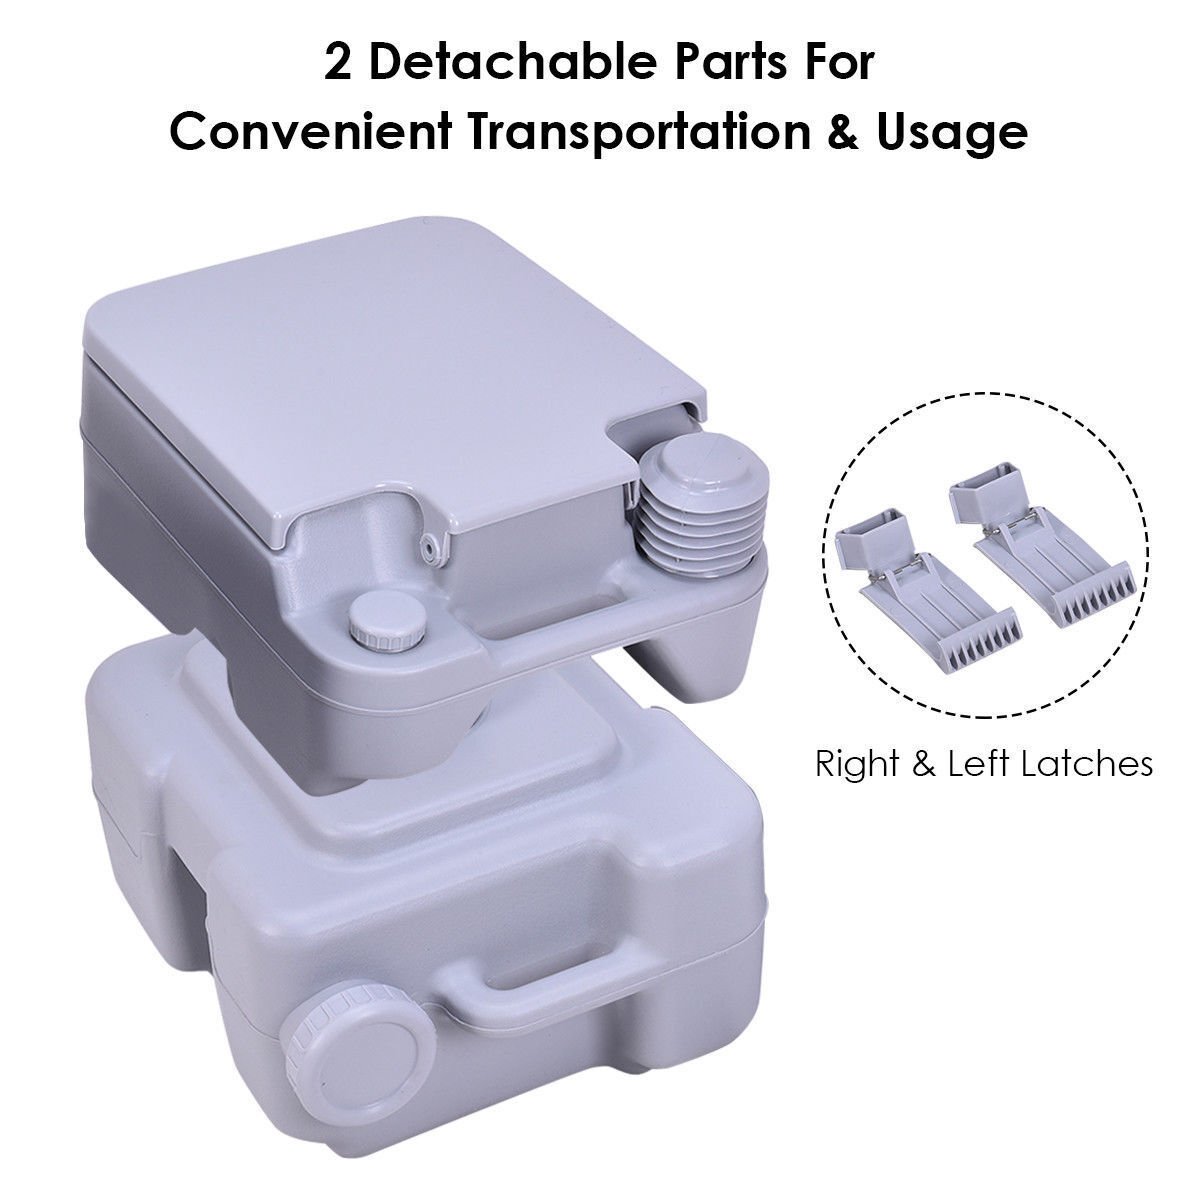 5.3 Gallon Portable Toilet with Waste Tank and Built-in Rotating Spout, Gray - Gallery Canada